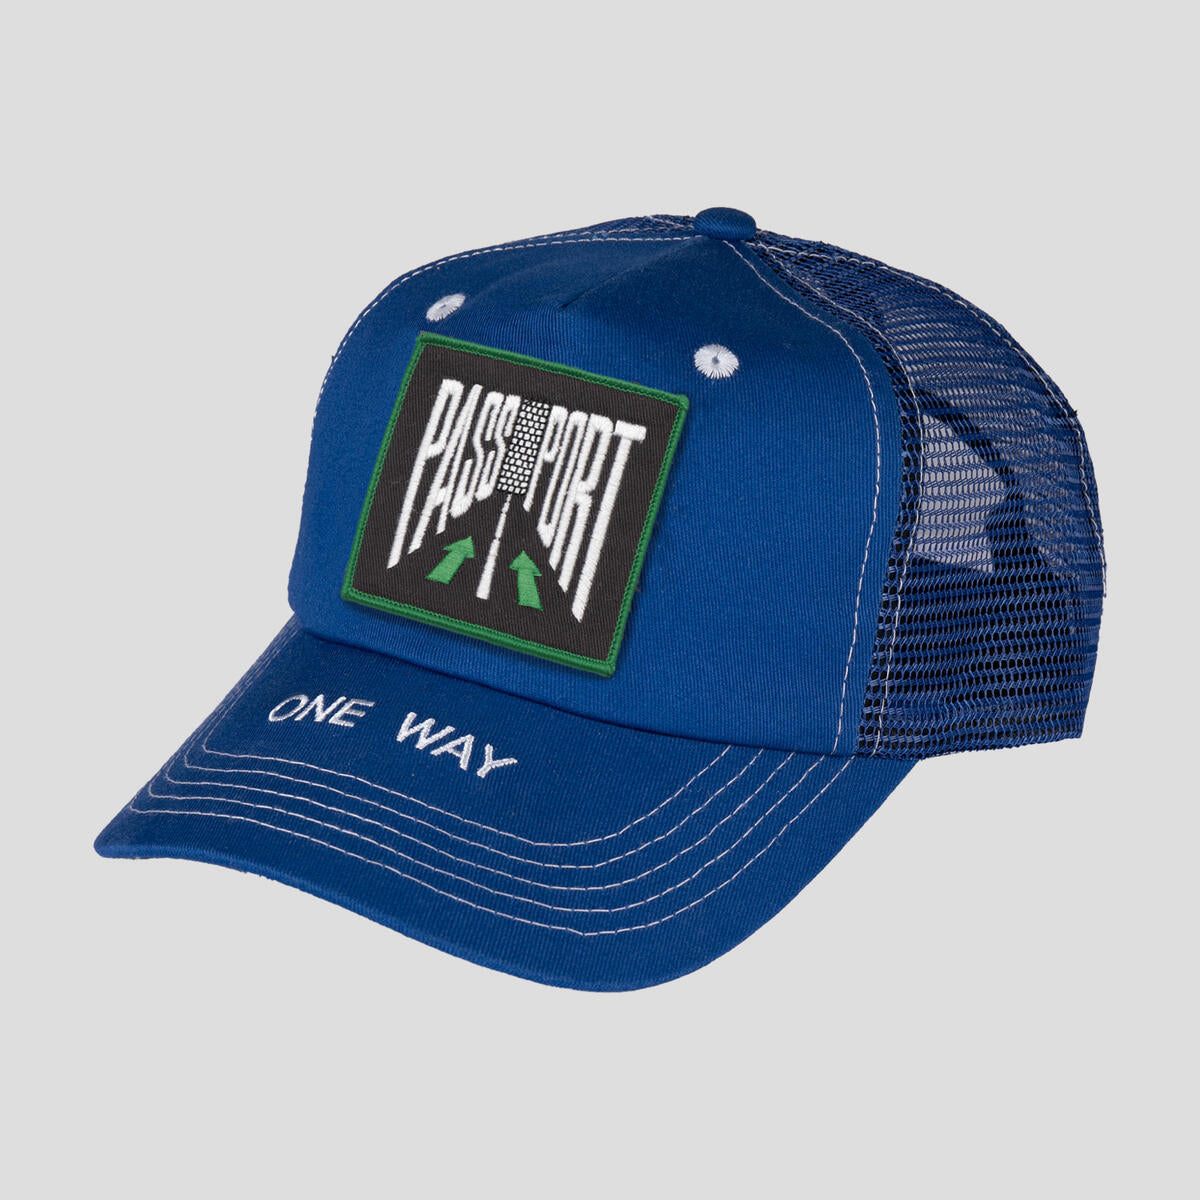 One Way Packers Trucker Cap - Royal Blue